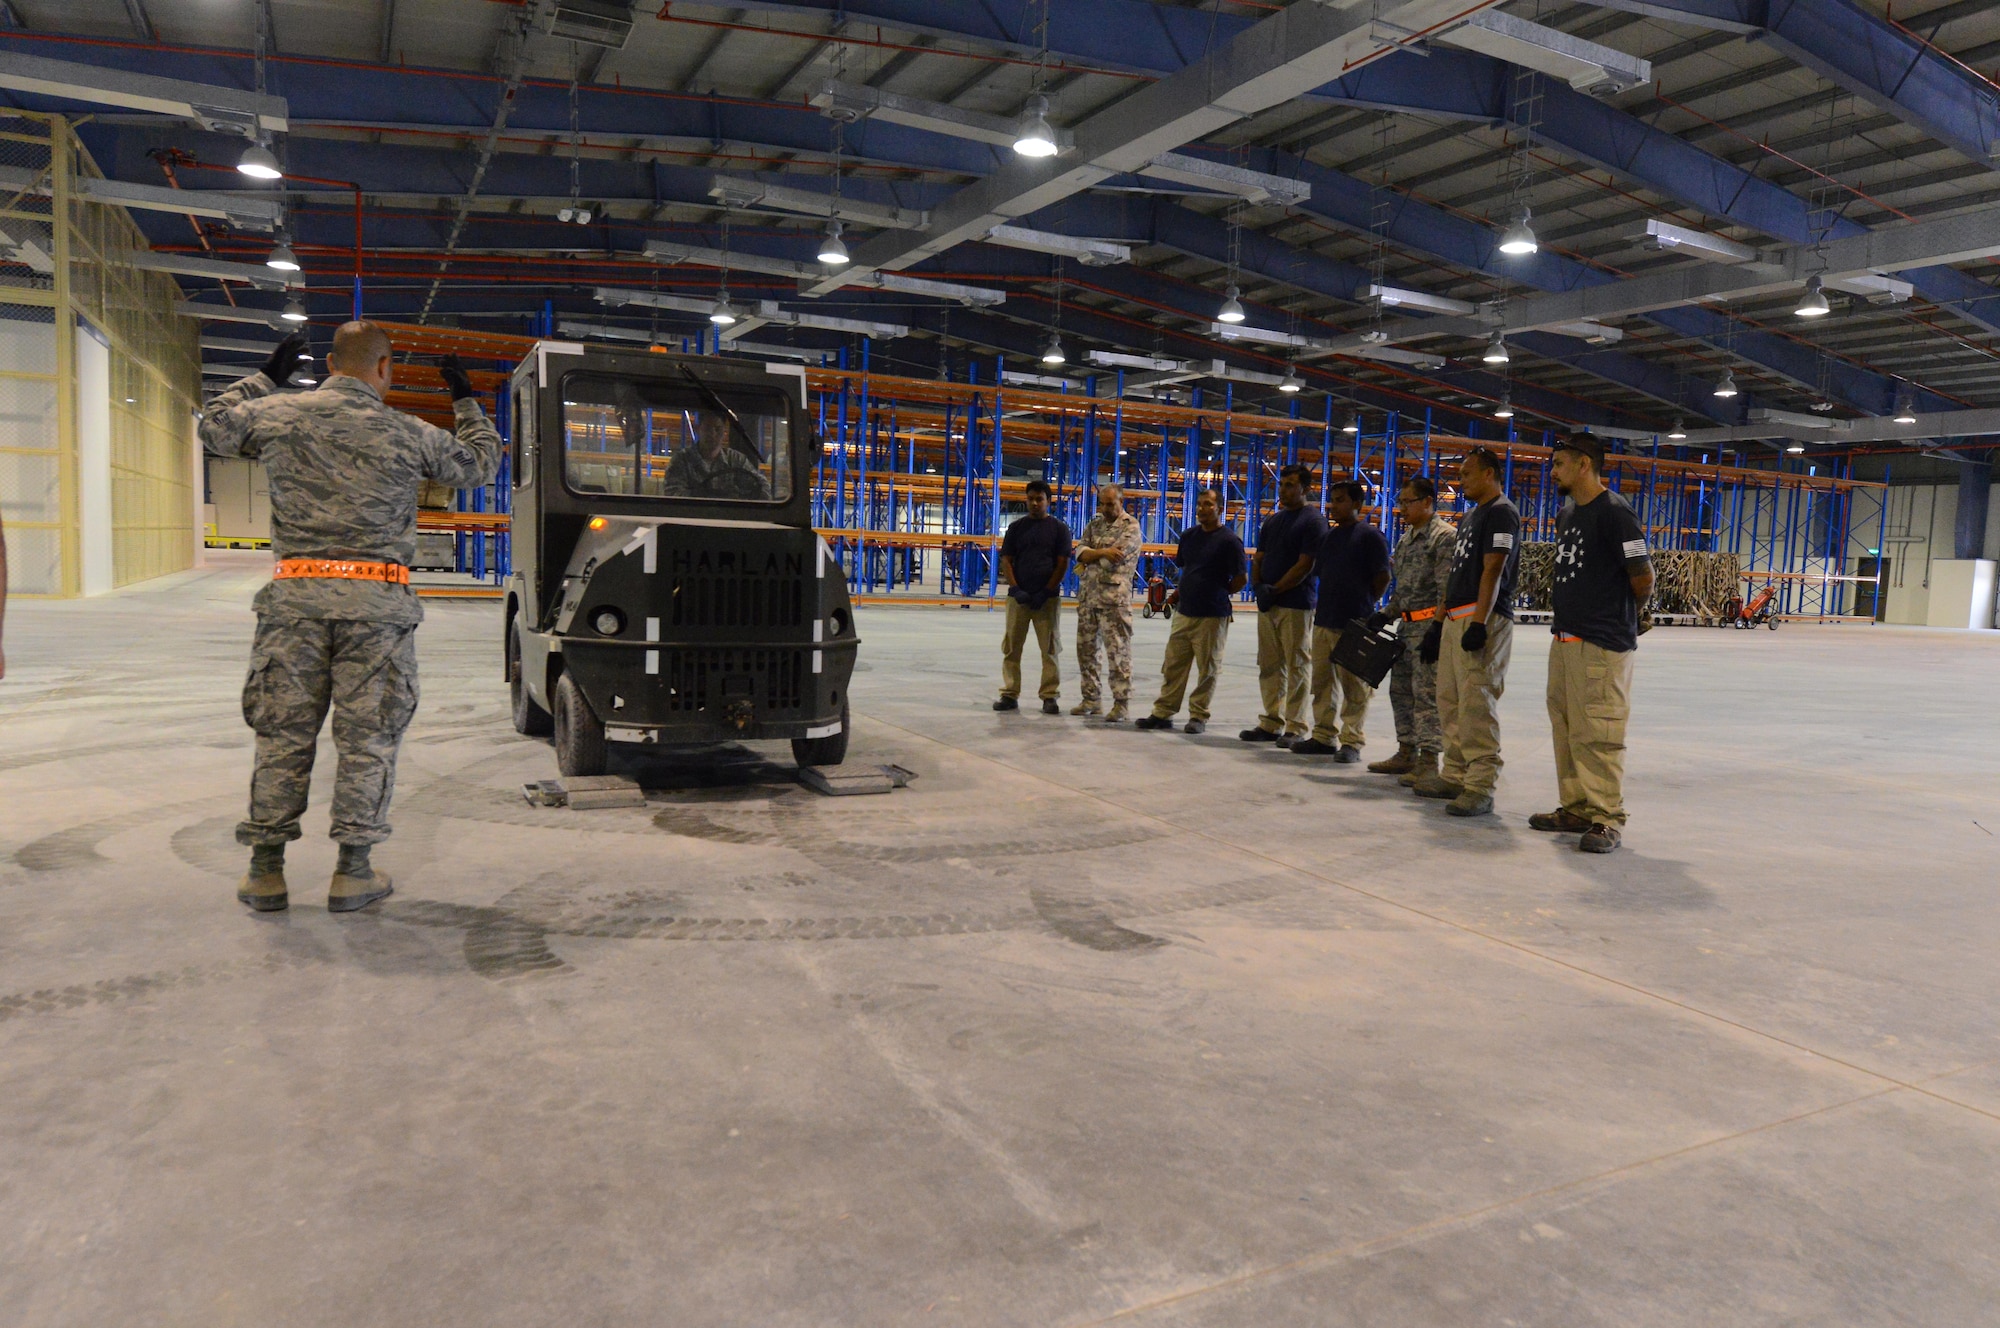 U.S. Air Force and Qatari air force personnel gather around a vehicle inside a newly constructed facility located at Al Udeid Air Base, Qatar, April 26, 2017. The personnel are taking part in the first of many opportunities to train on how to properly collect information necessary to determine the total weight and center of gravity for equipment to be loaded for transportation on aircraft.